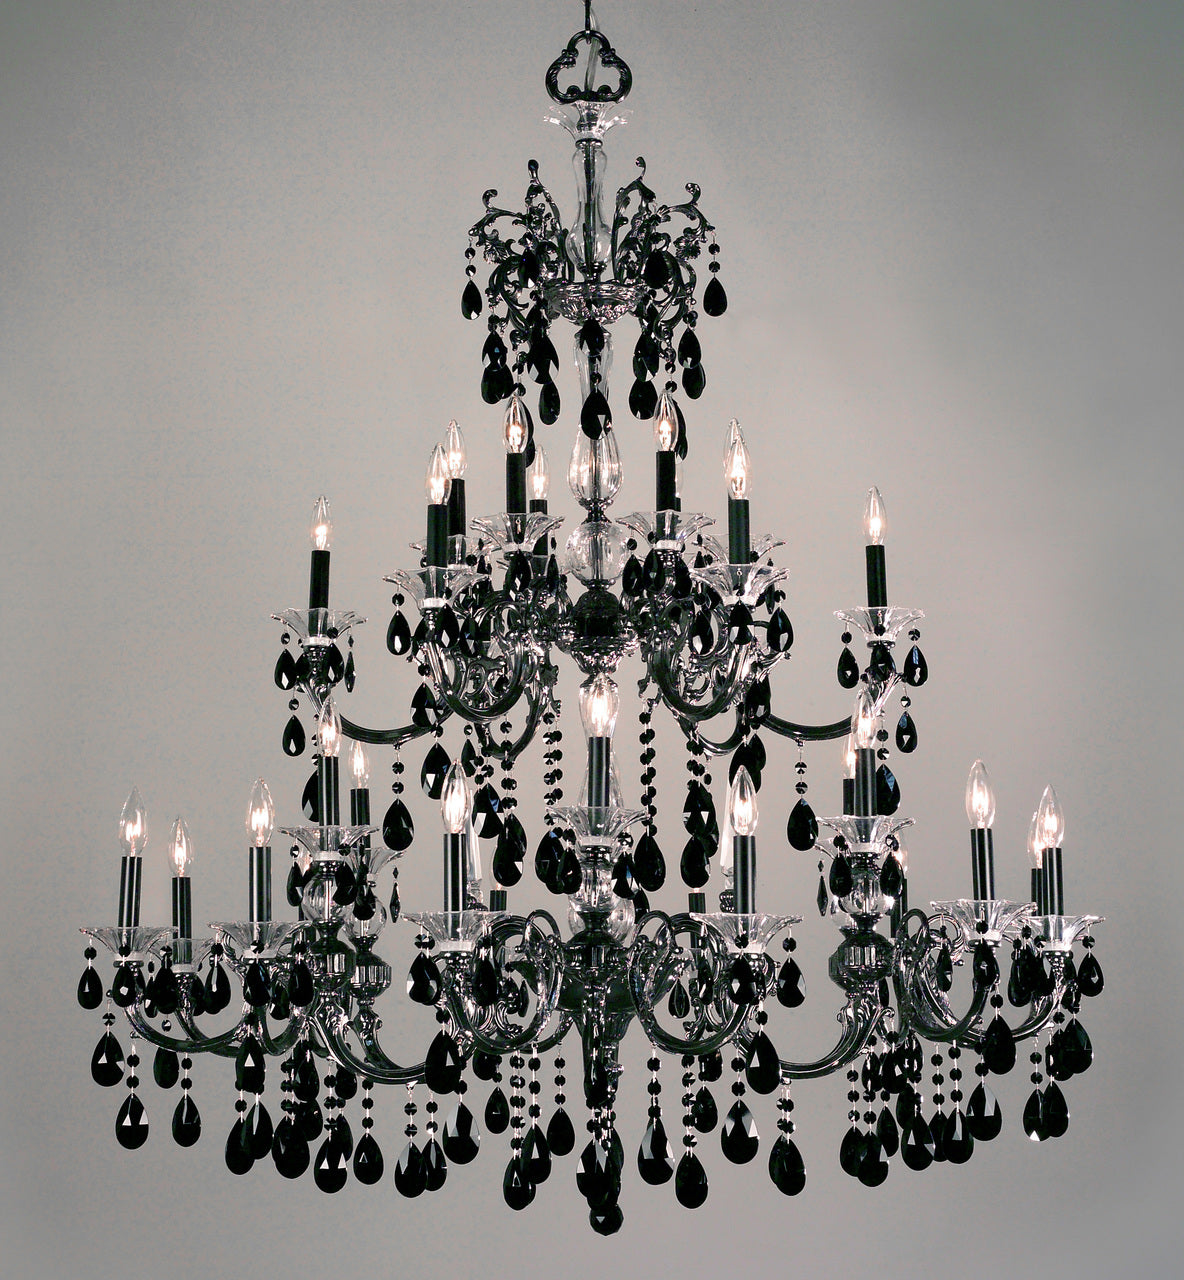 Classic Lighting 57060 CHP SJT Via Lombardi Crystal Chandelier in Champagne Pearl (Imported from Spain)